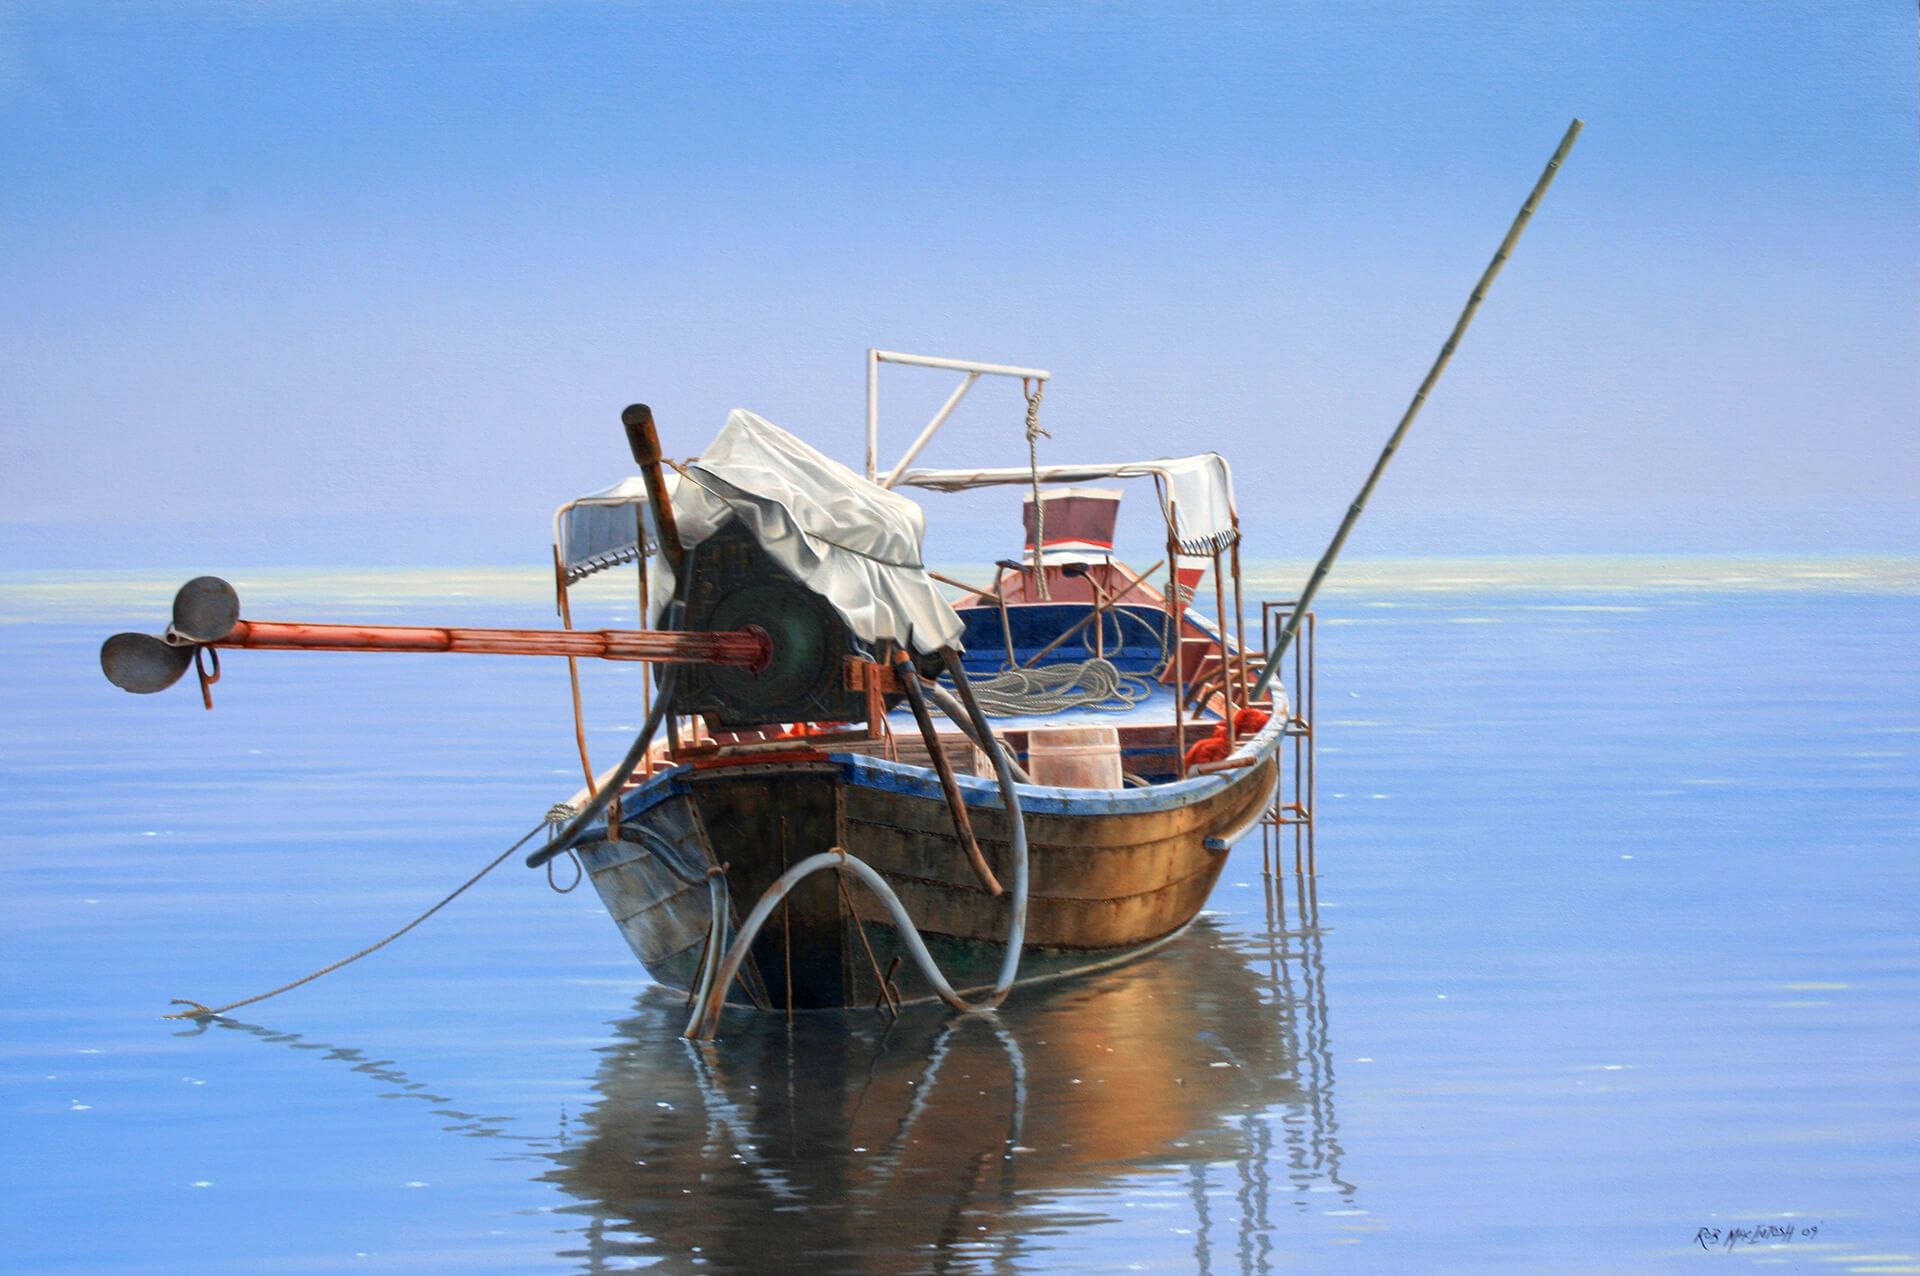 Photorealistic painting of a lone boat over a still ocean